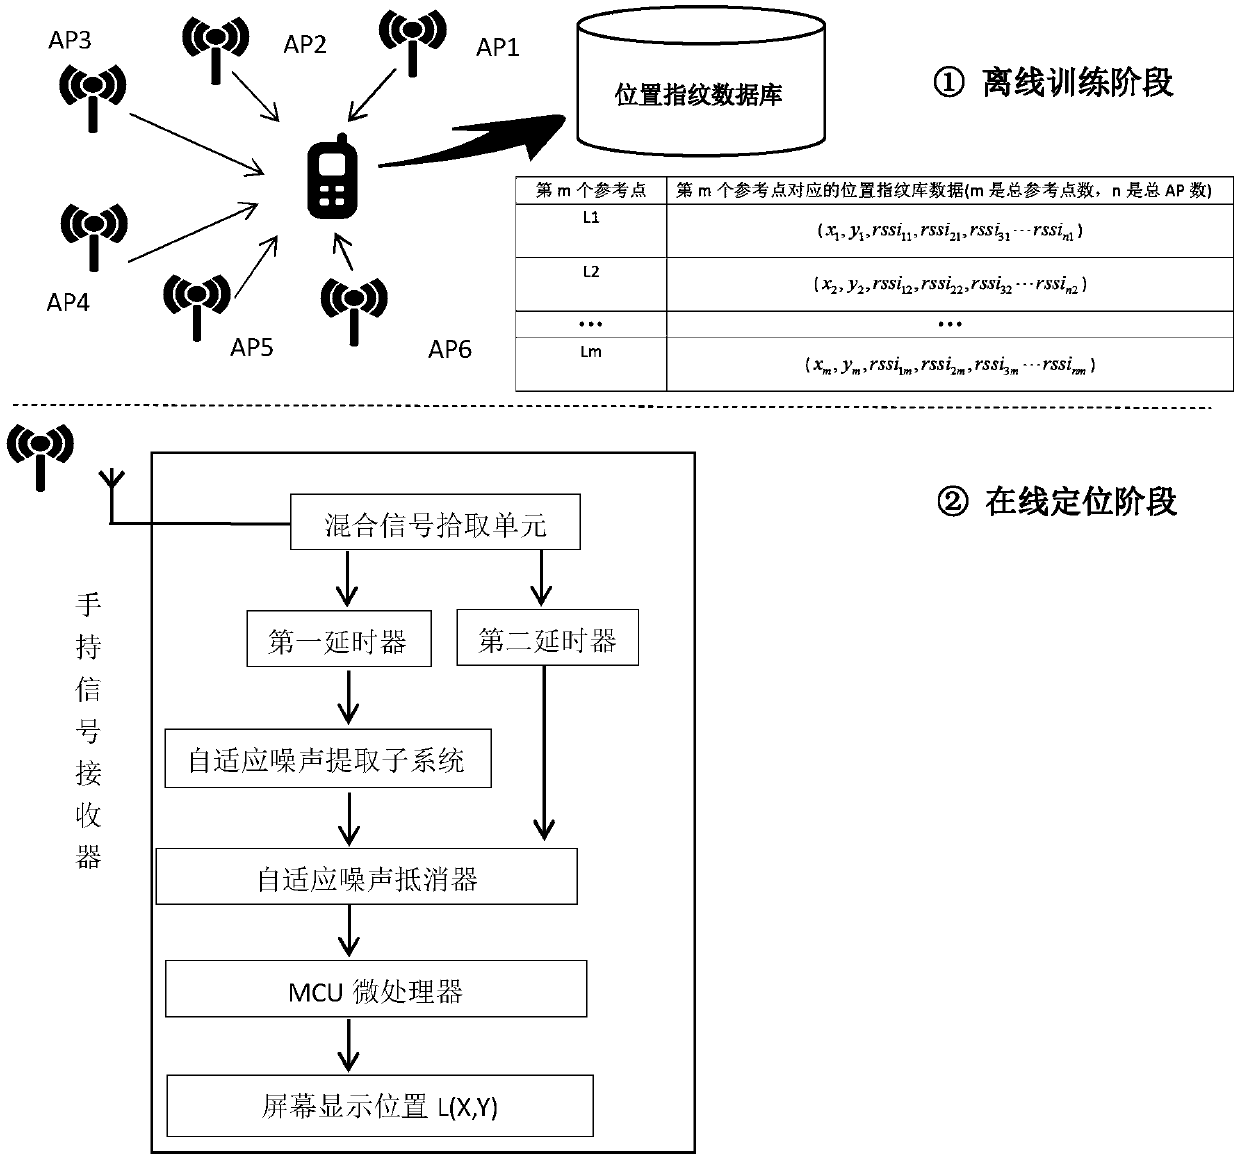 WiFi indoor positioning system and method based on self-adaptive noise cancellation